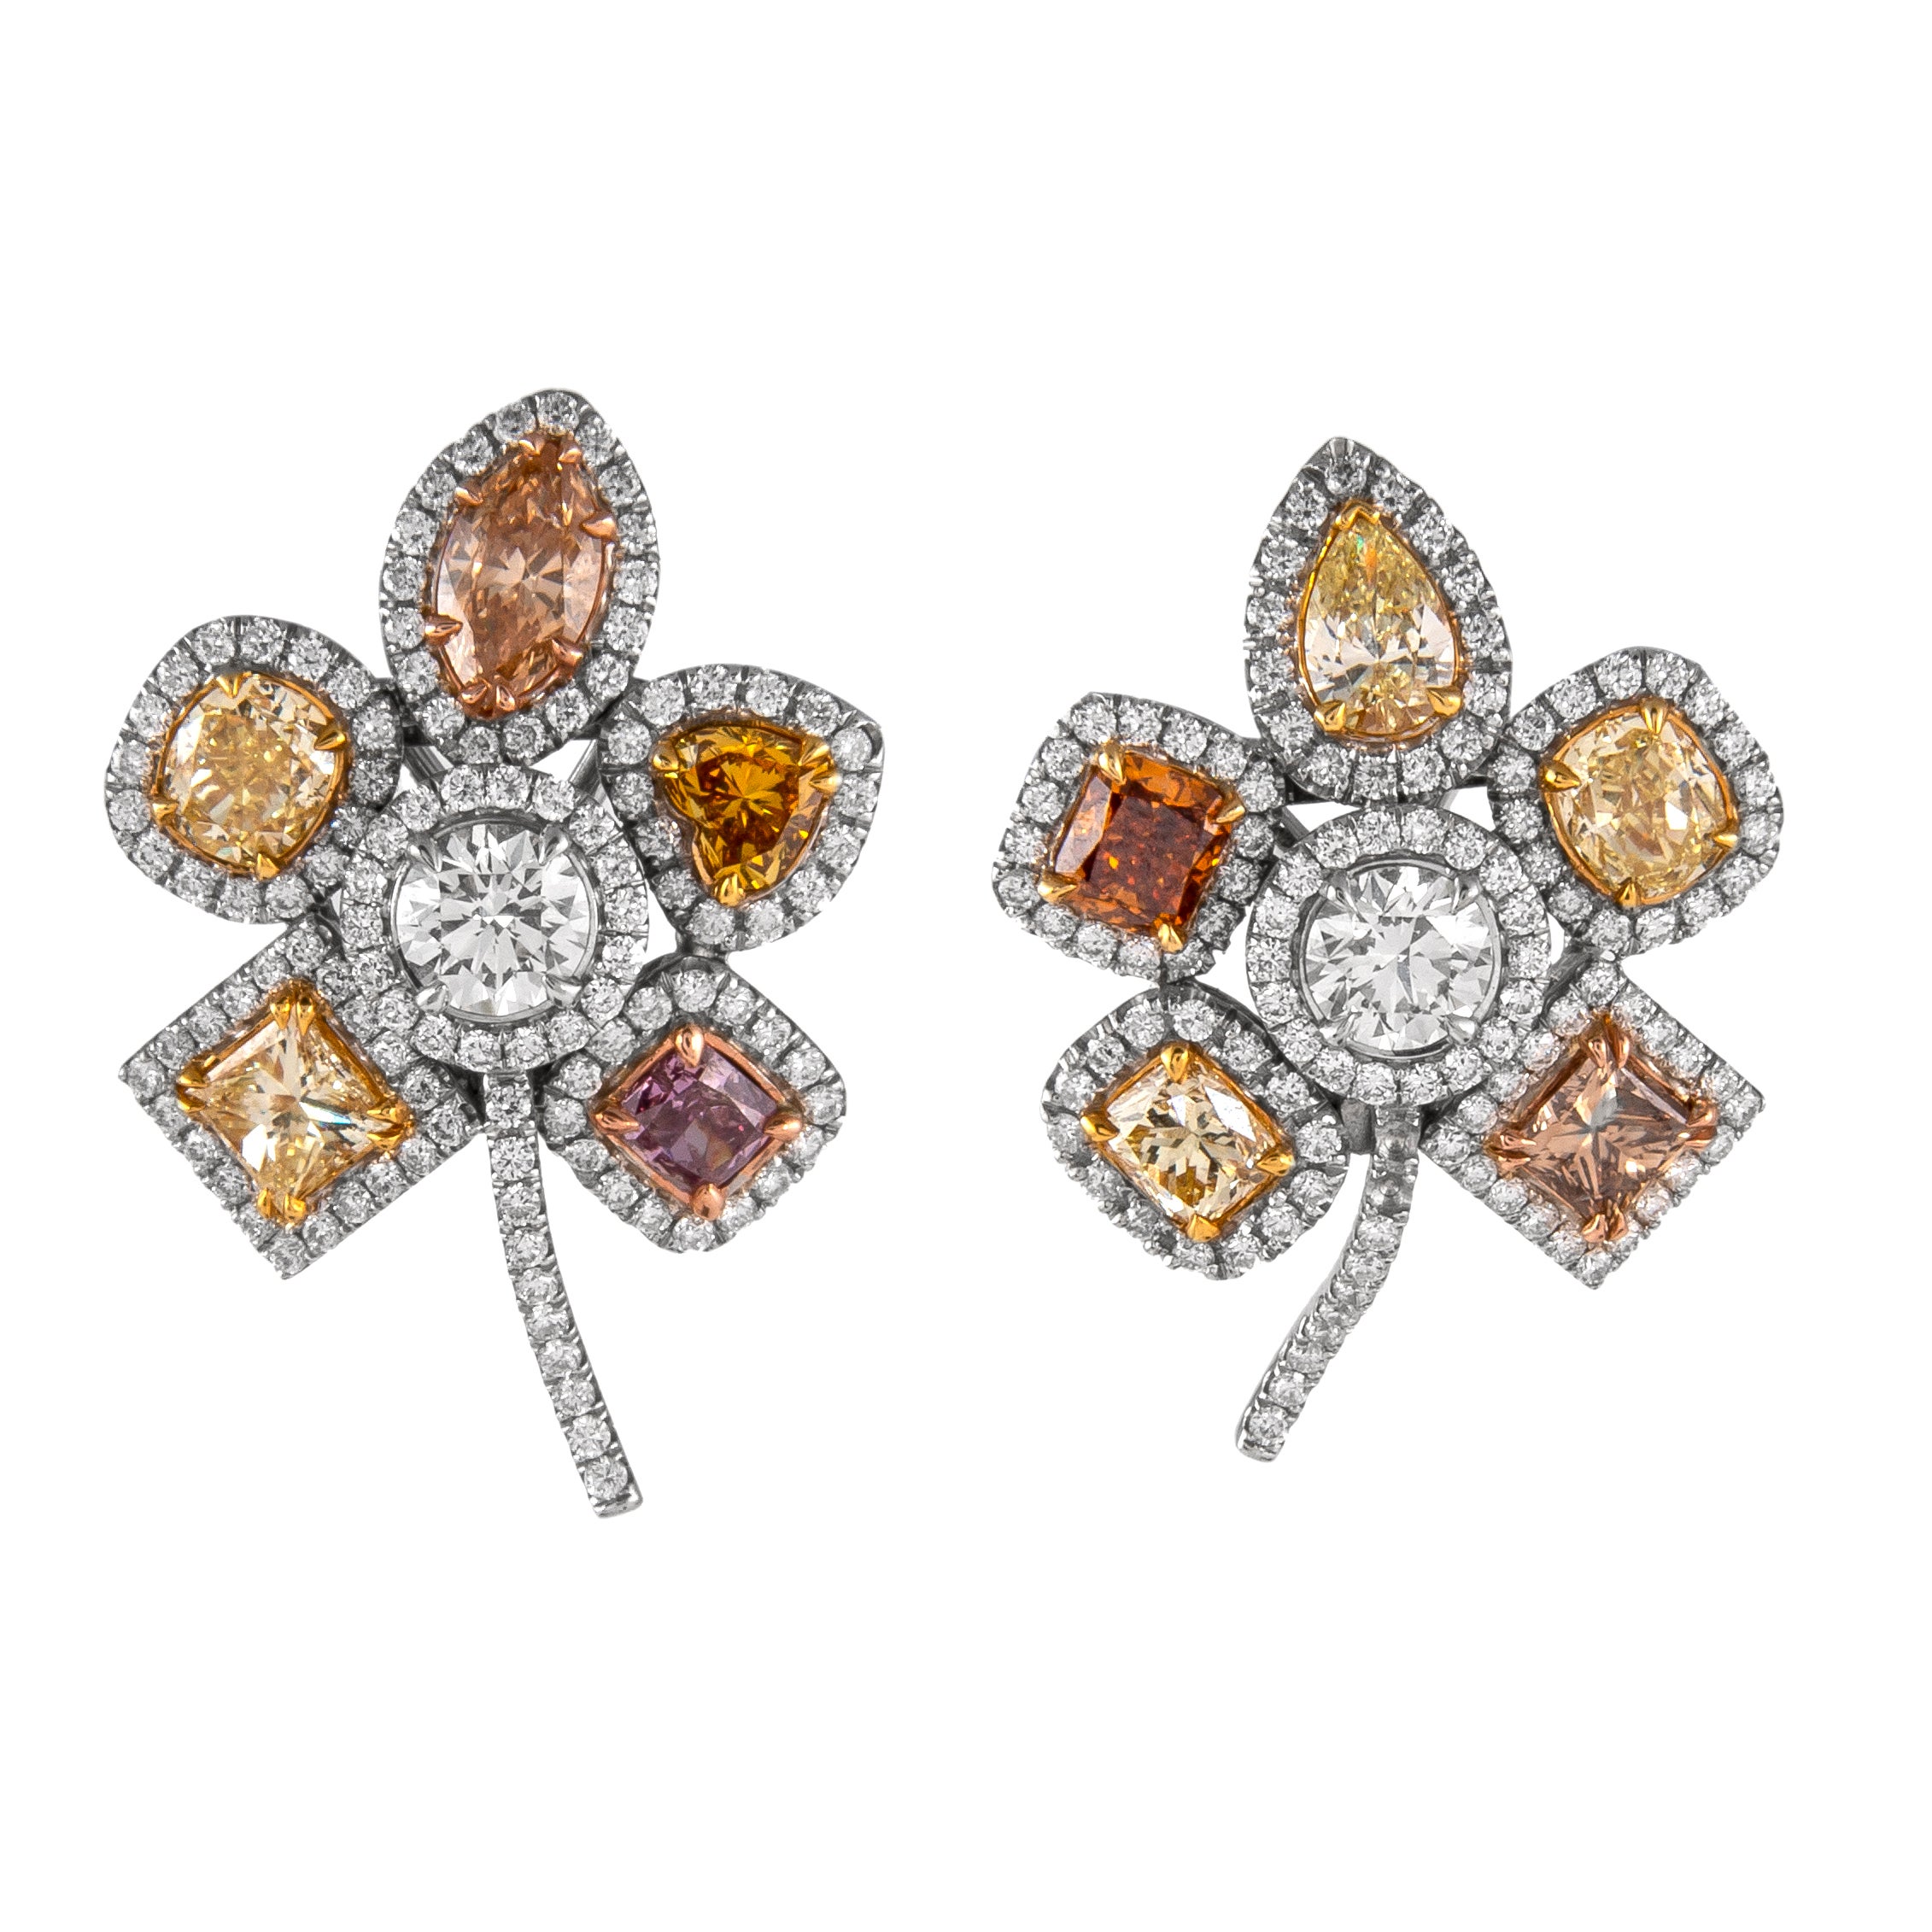 Alexander Beverly Hills GIA 8.21ct Fancy Color Diamond Floral Earrings 18k Gold